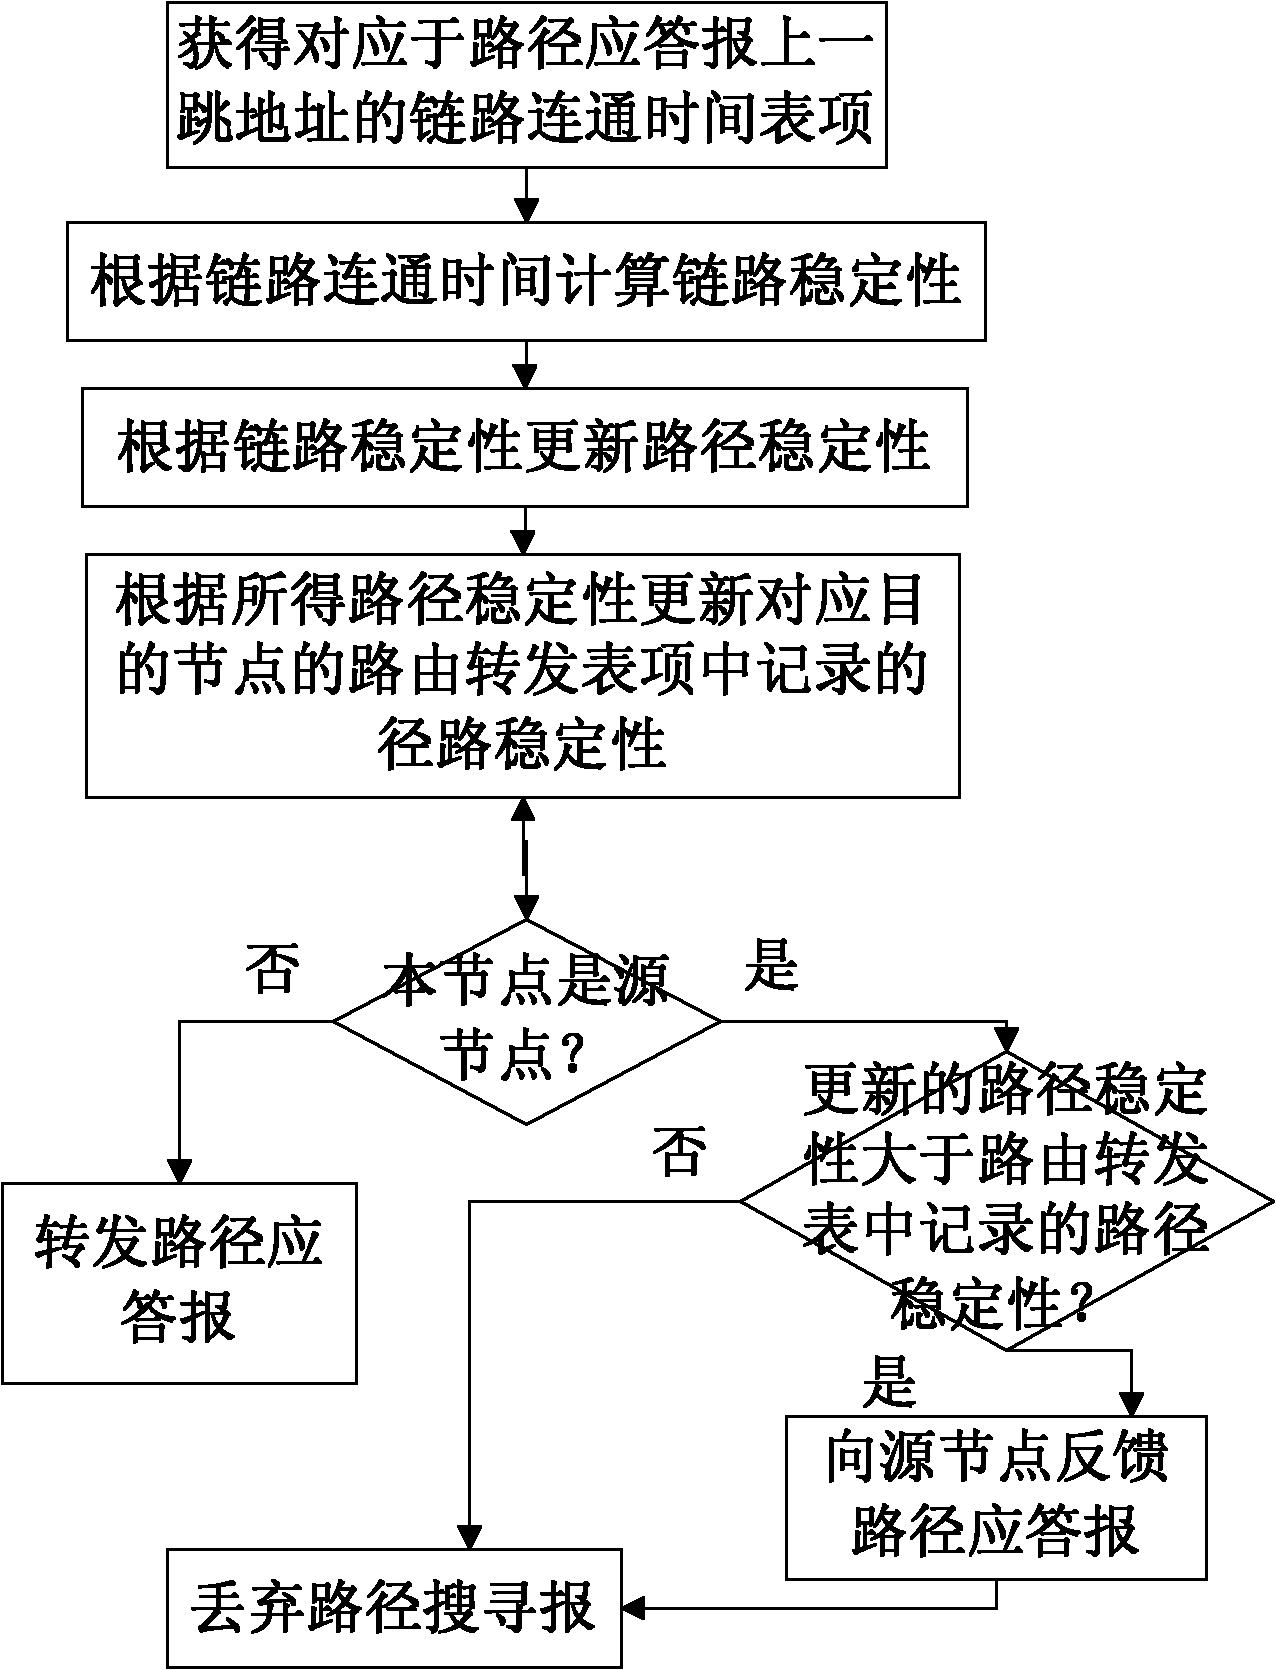 Distributed ad hoc network stable path routing method based on link lifetime